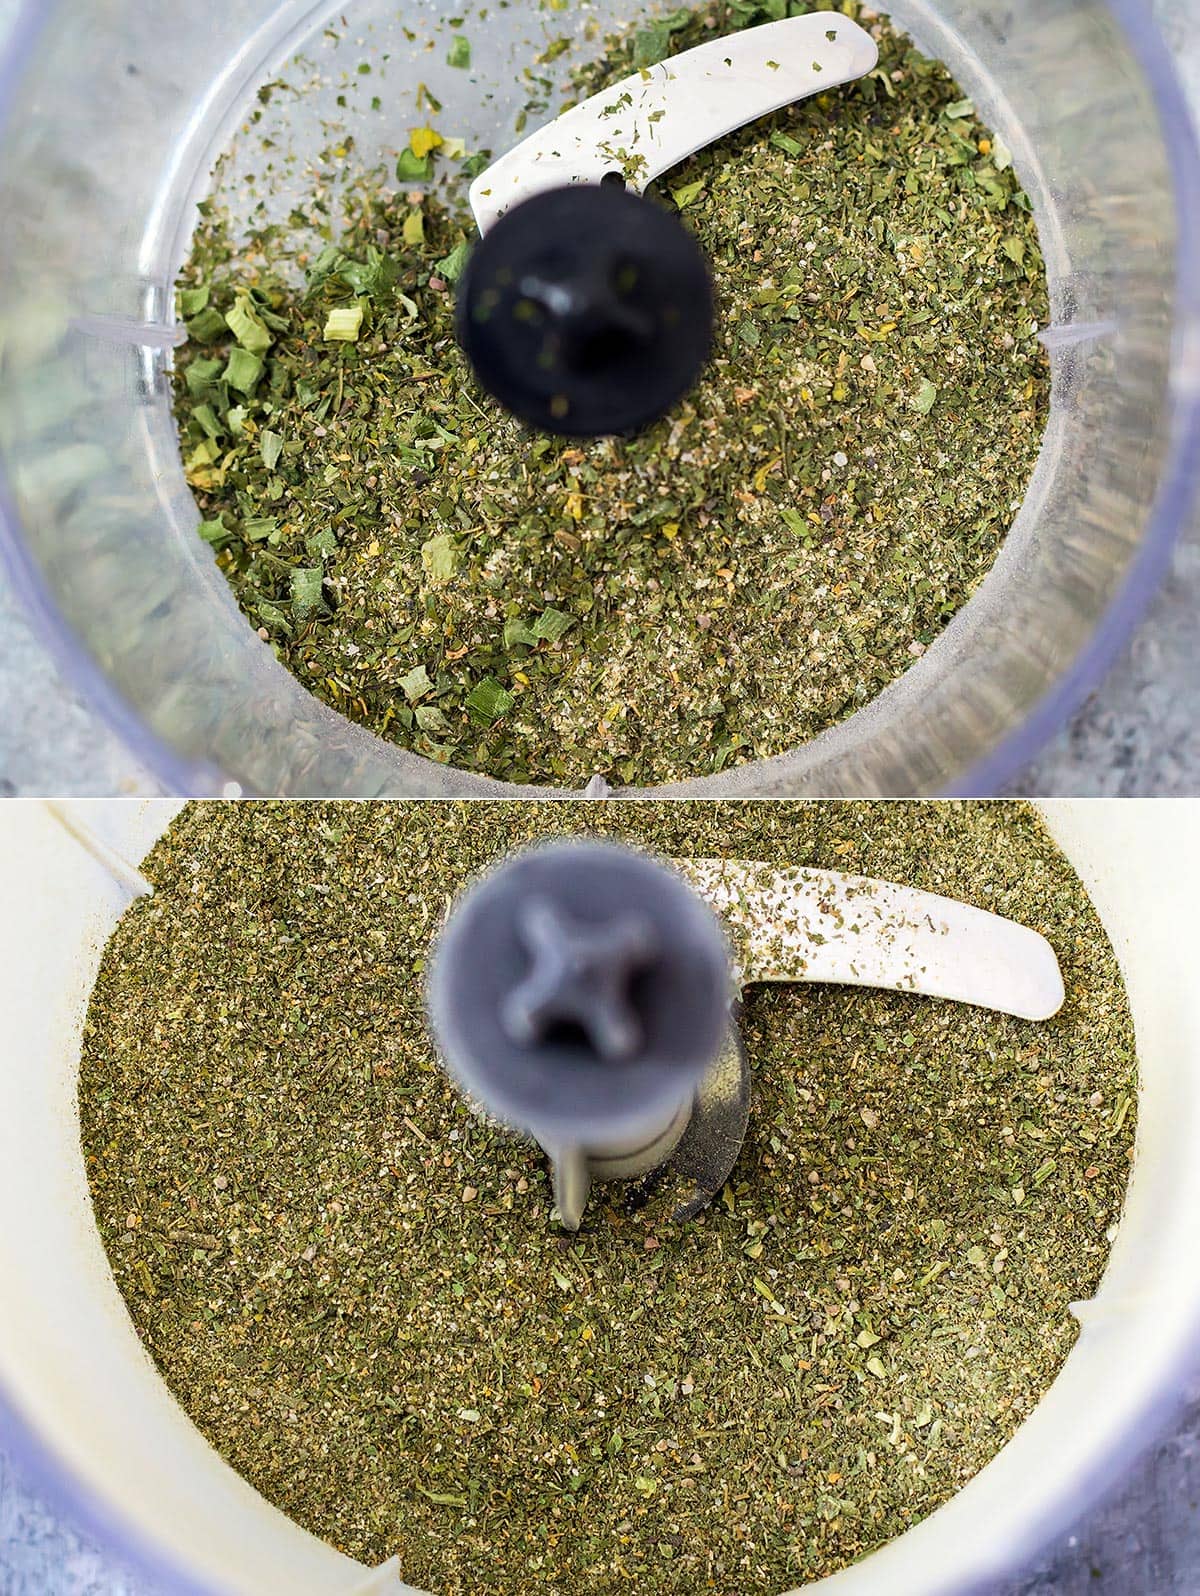 Ranch mix before and after blending